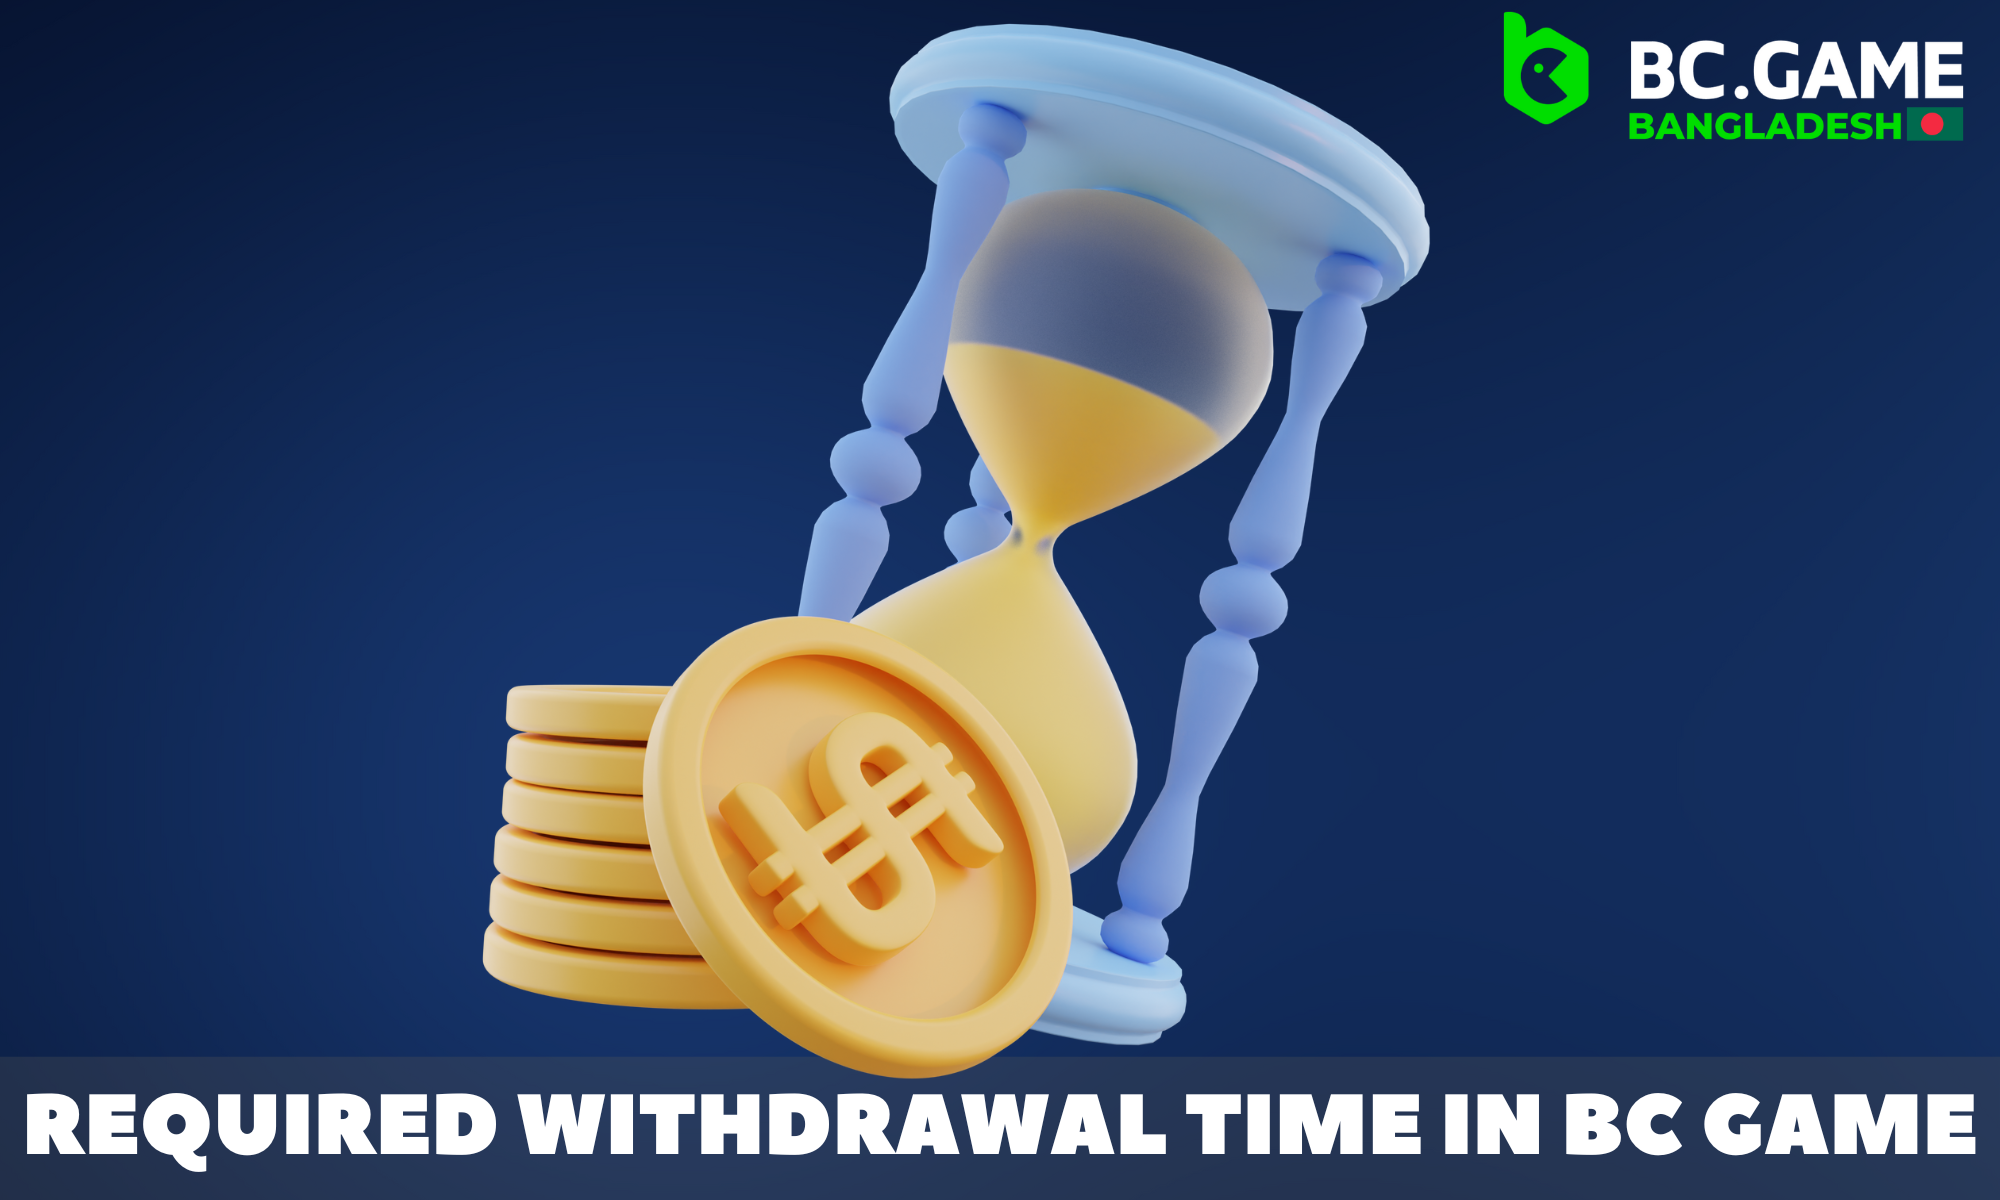 Read more about withdrawal times at BC Gasme